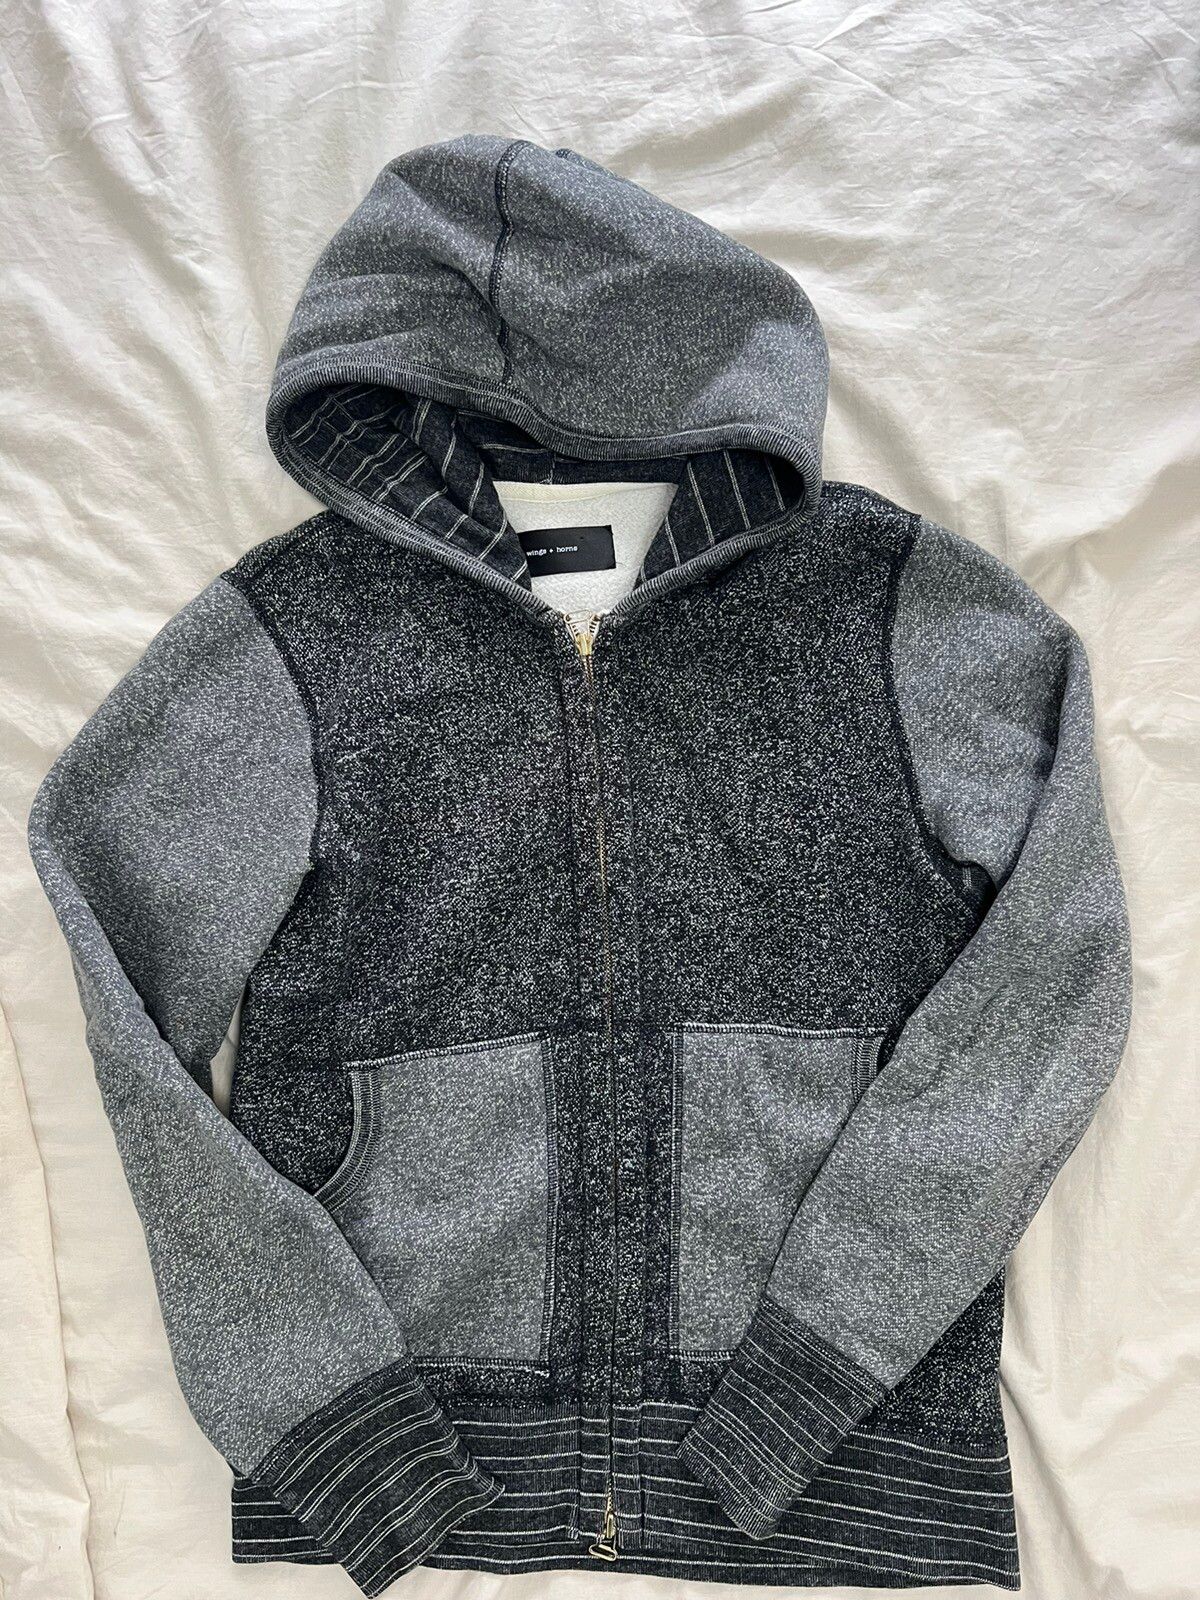 Wings + Horns Wings + Horns - Tiger Fleece Size US M / EU 48-50 / 2 - 1 Preview